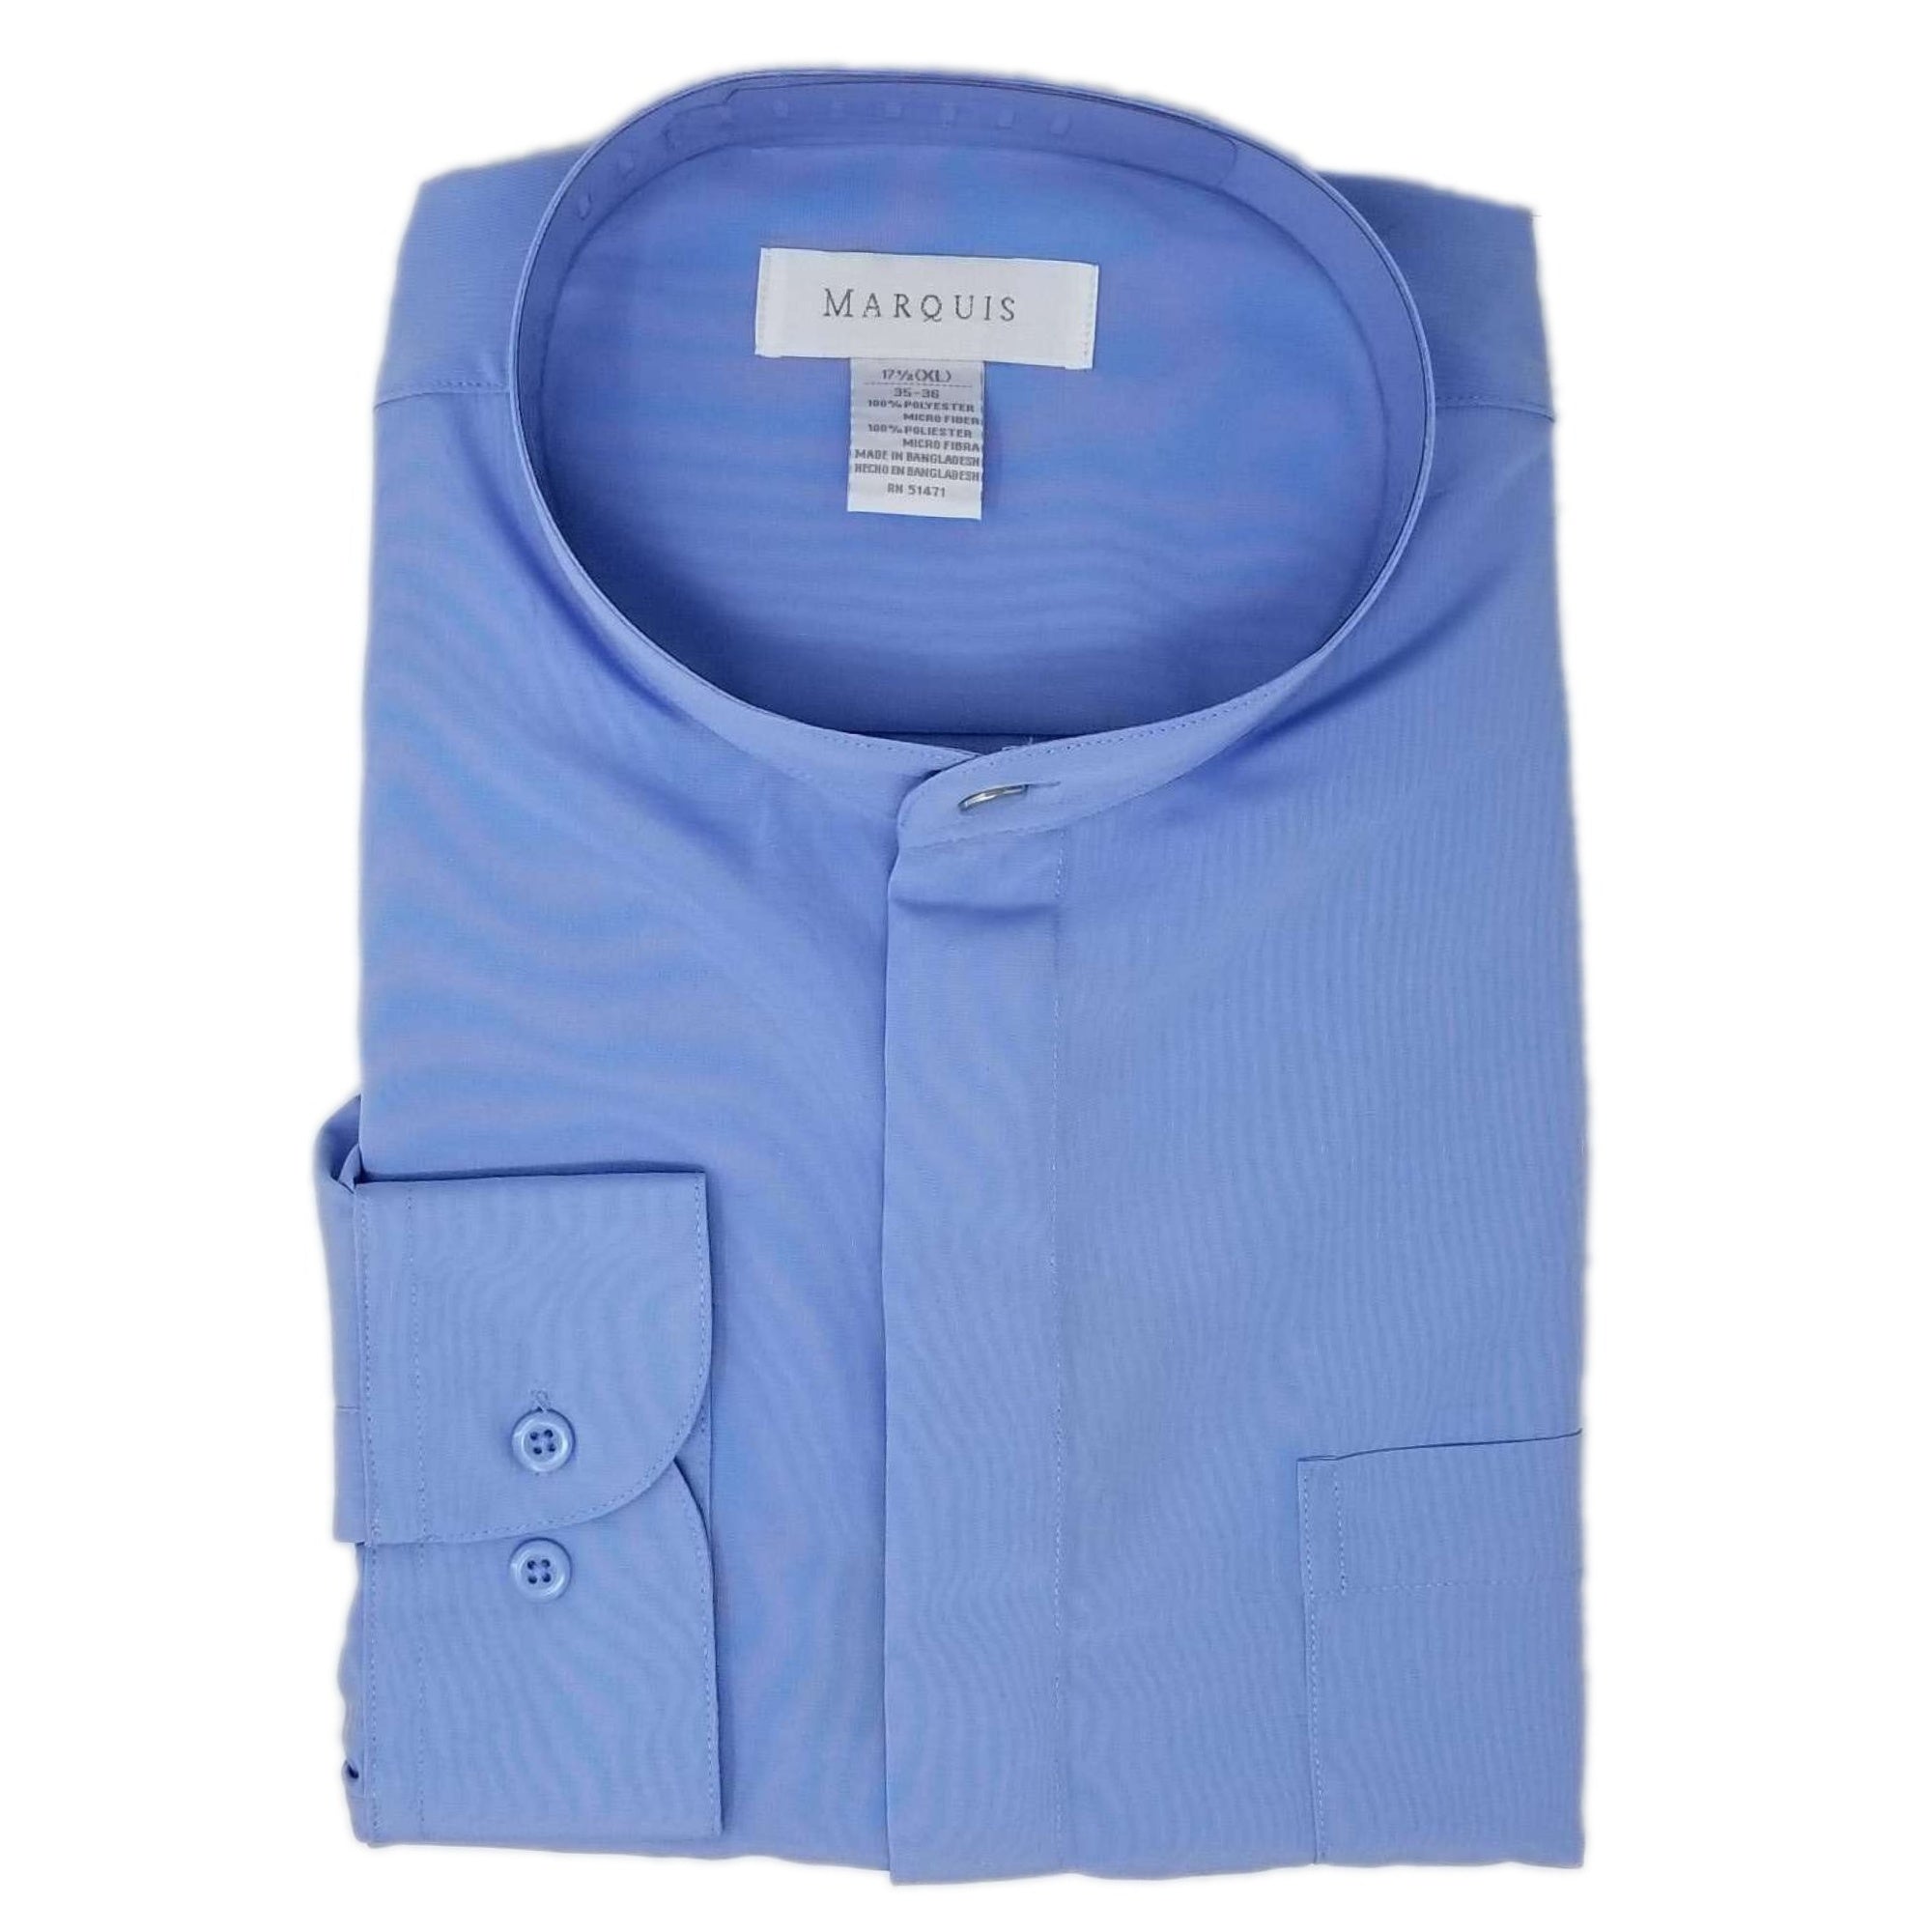 Marquis Long Sleeve Banded Collar Shirt Size  S To XXXL Banded Collar Shirt Marquis Light Blue Small 14.5, 32-33 